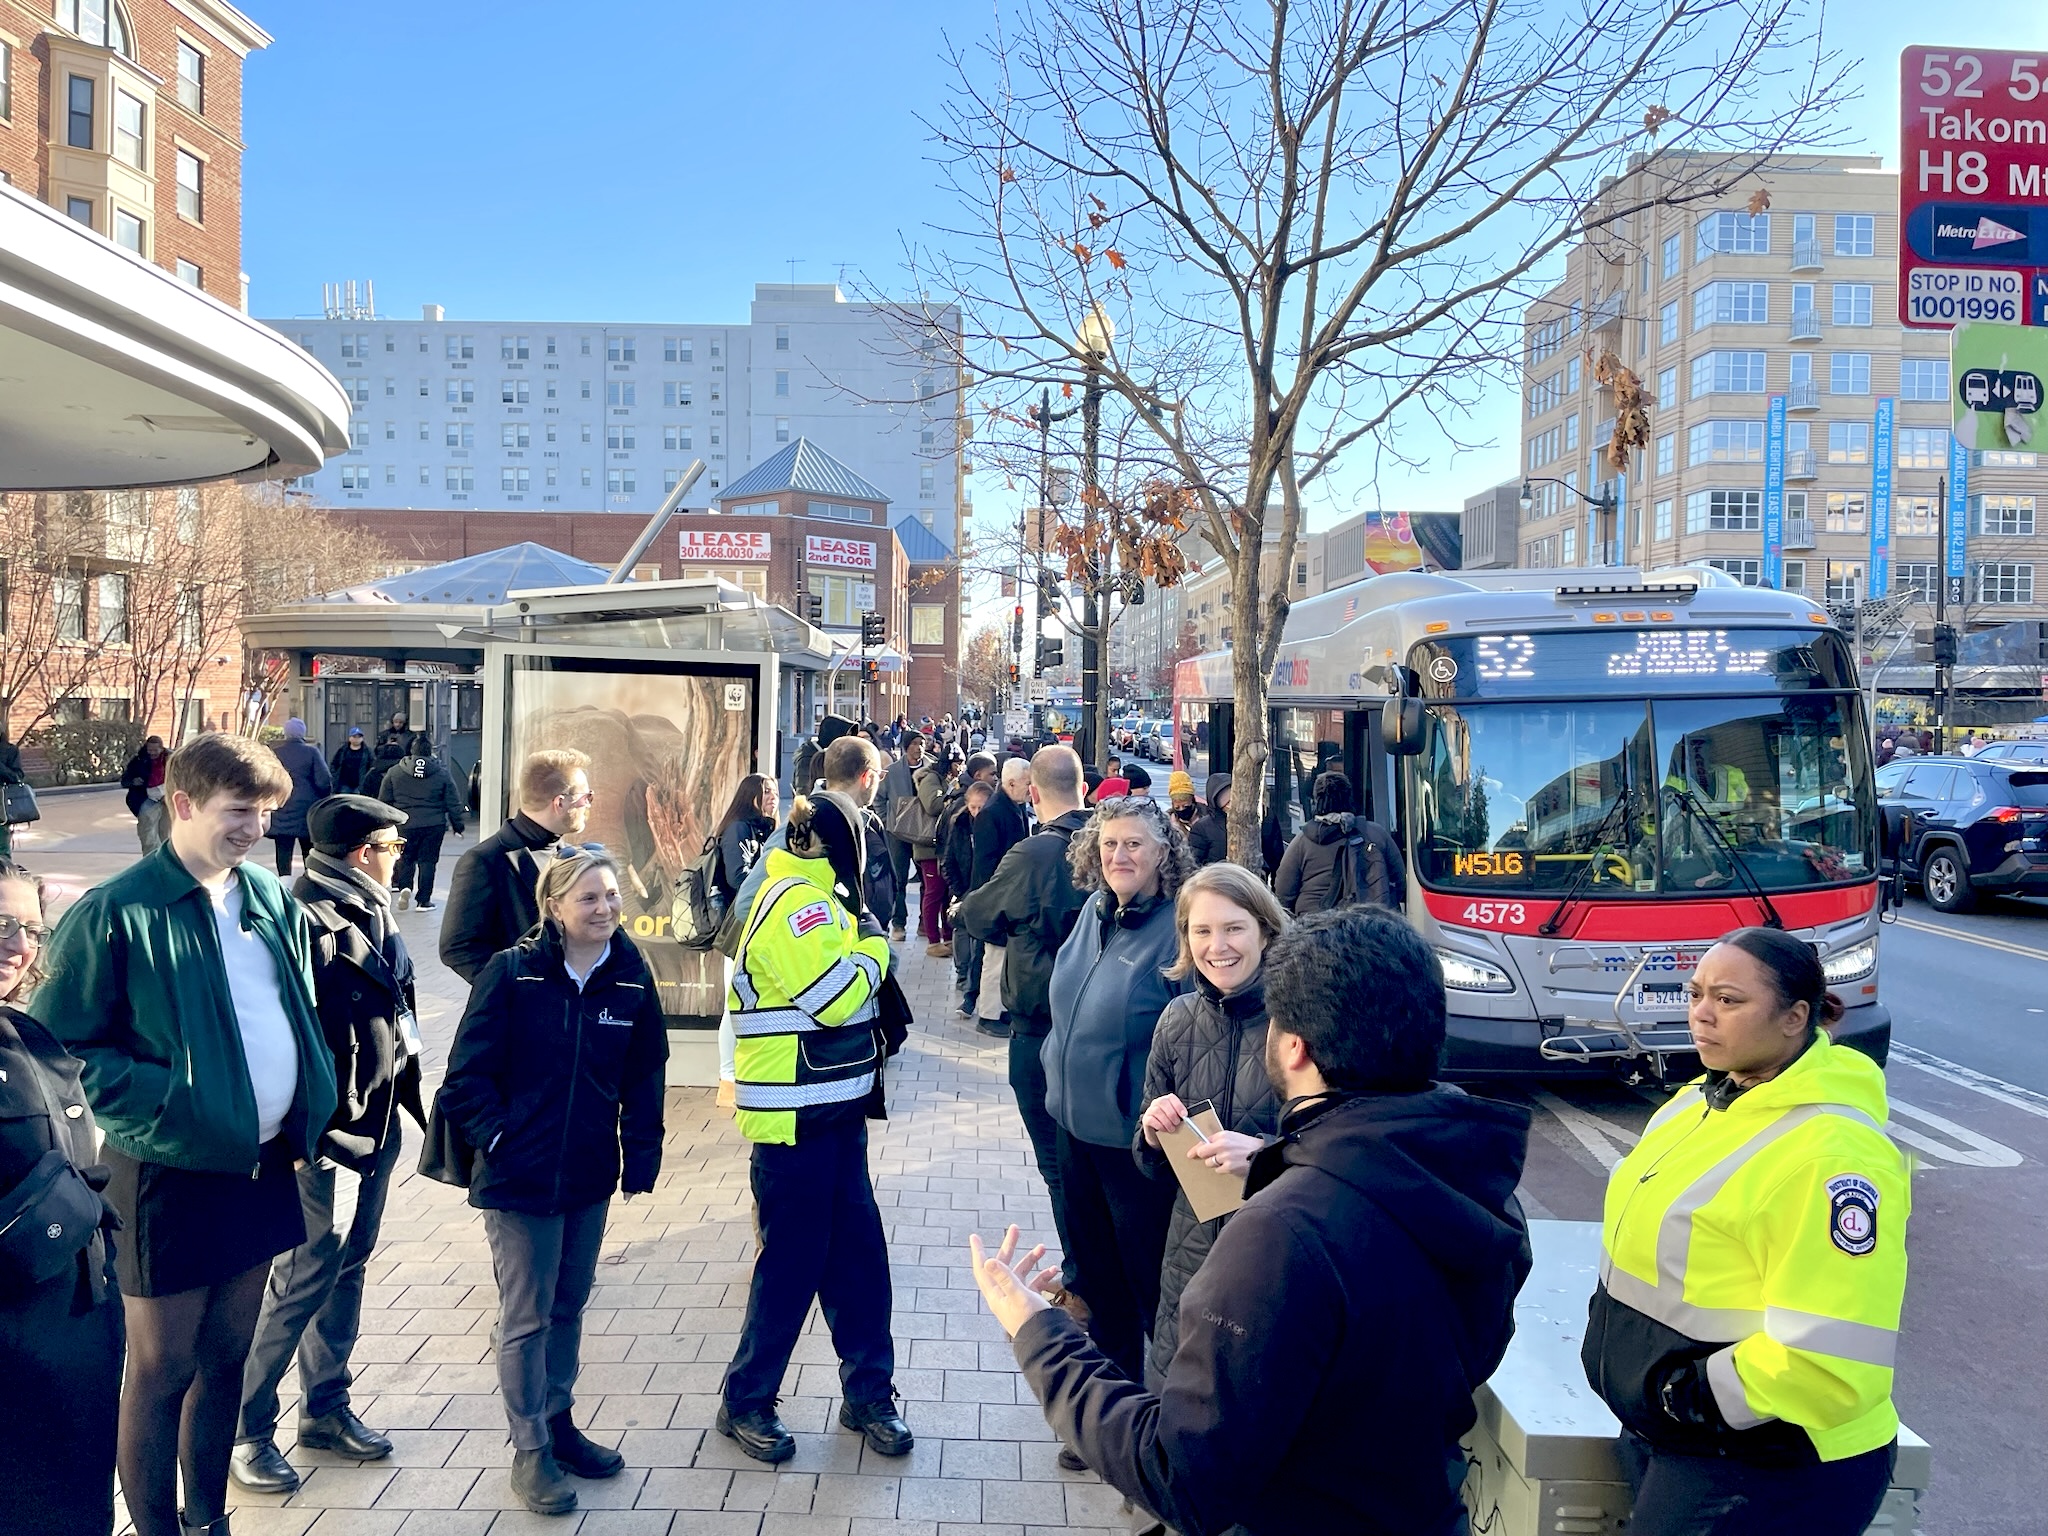 A group of residents, wearing coats on a chilly day, on the sidewalk talking. One man gestures with his hands and is speaking. Two women in yellow safety jackets/uniforms are present. A 52 bus is pulled up at the curb.